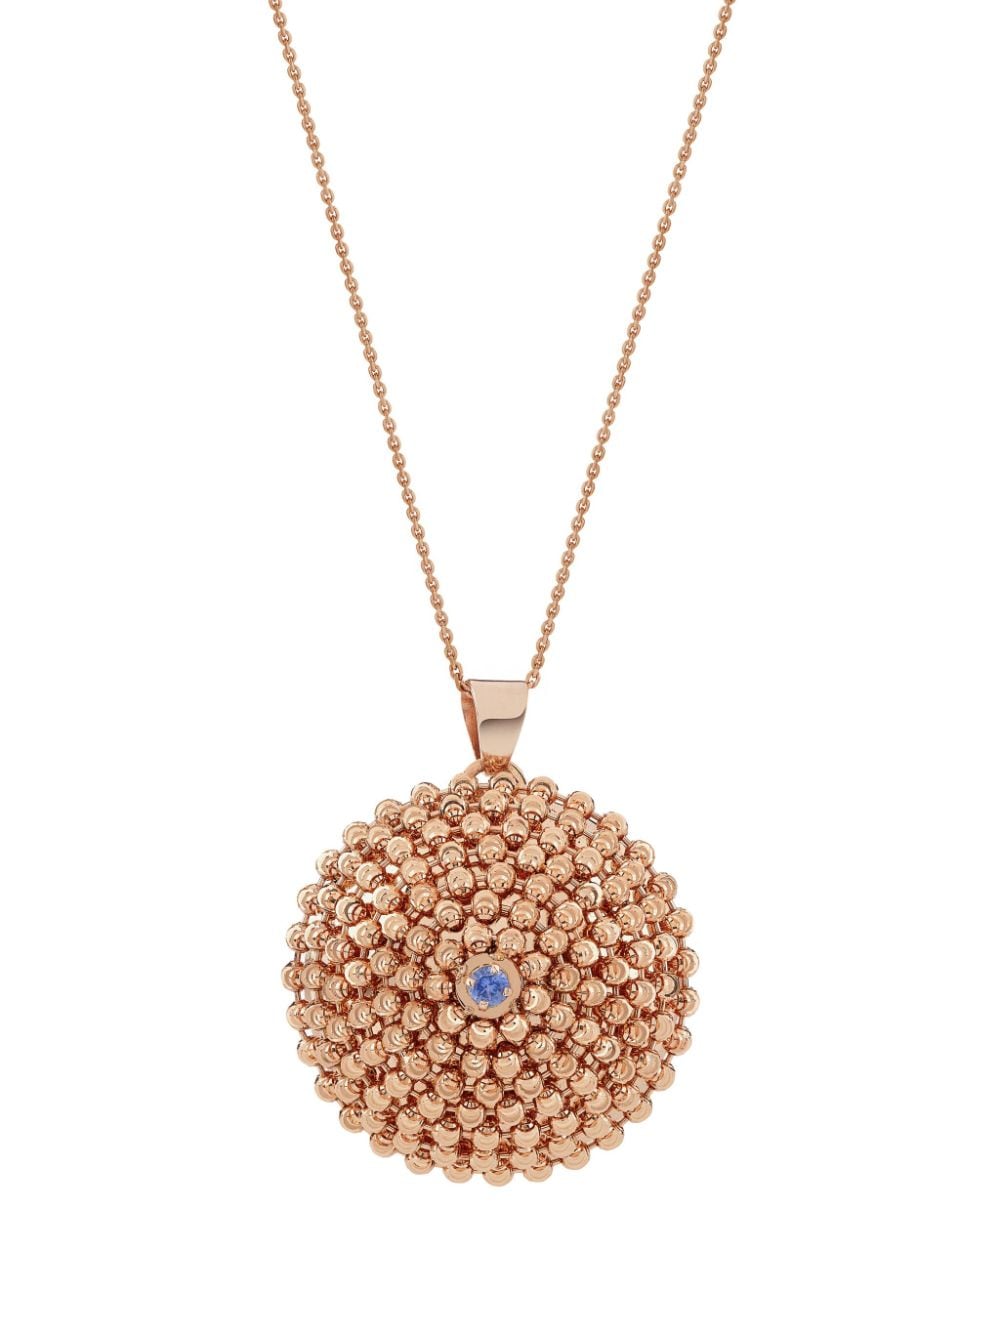 18kt rose gold Mimosa sapphire necklace